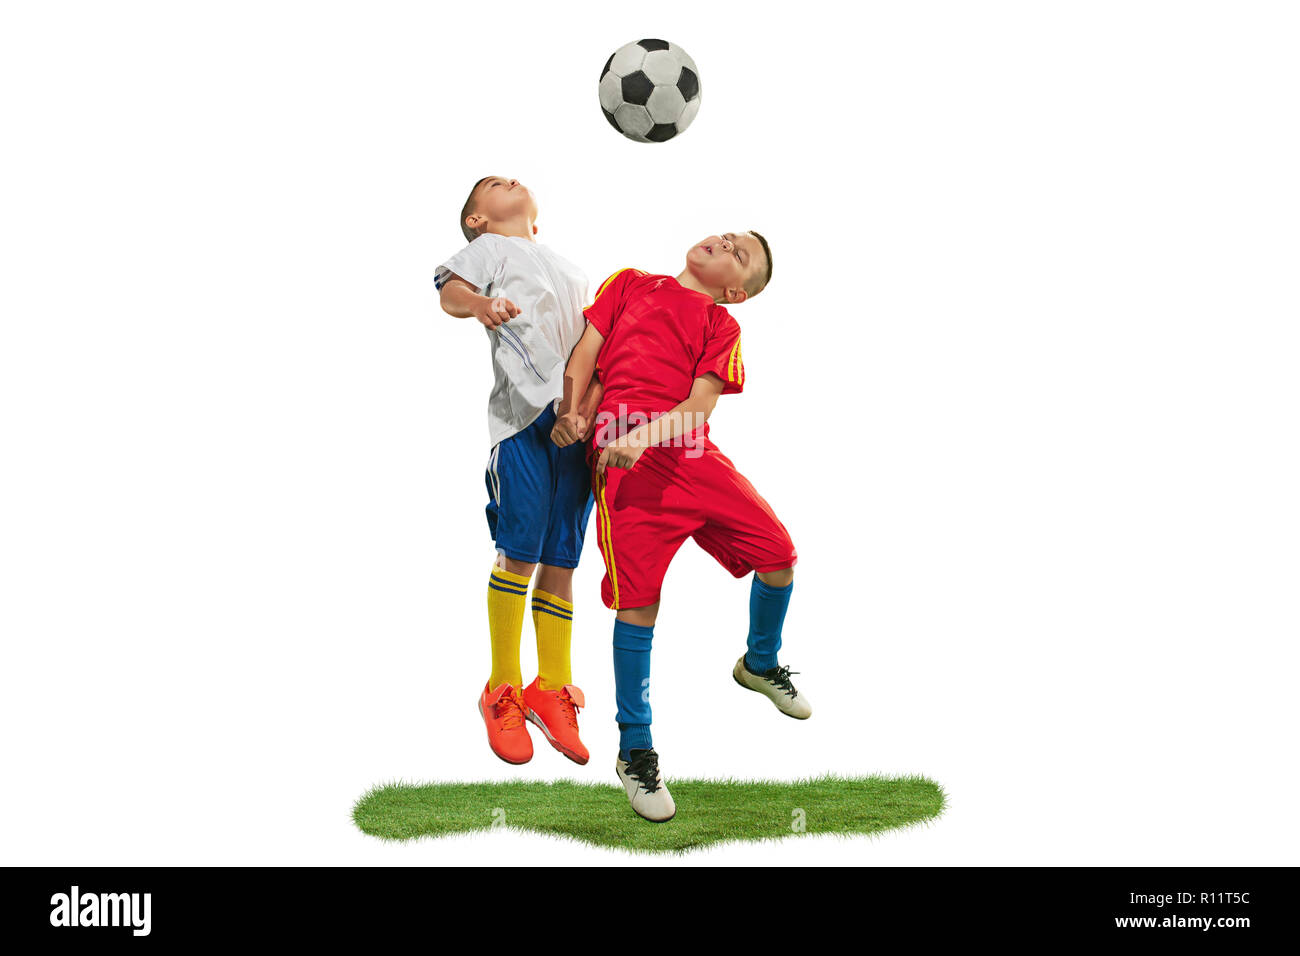 Young boys with soccer ball doing flying kick, isolated on white. football soccer players in motion on studio background. Fit jumping boys in action, jump, movement at game. Stock Photo